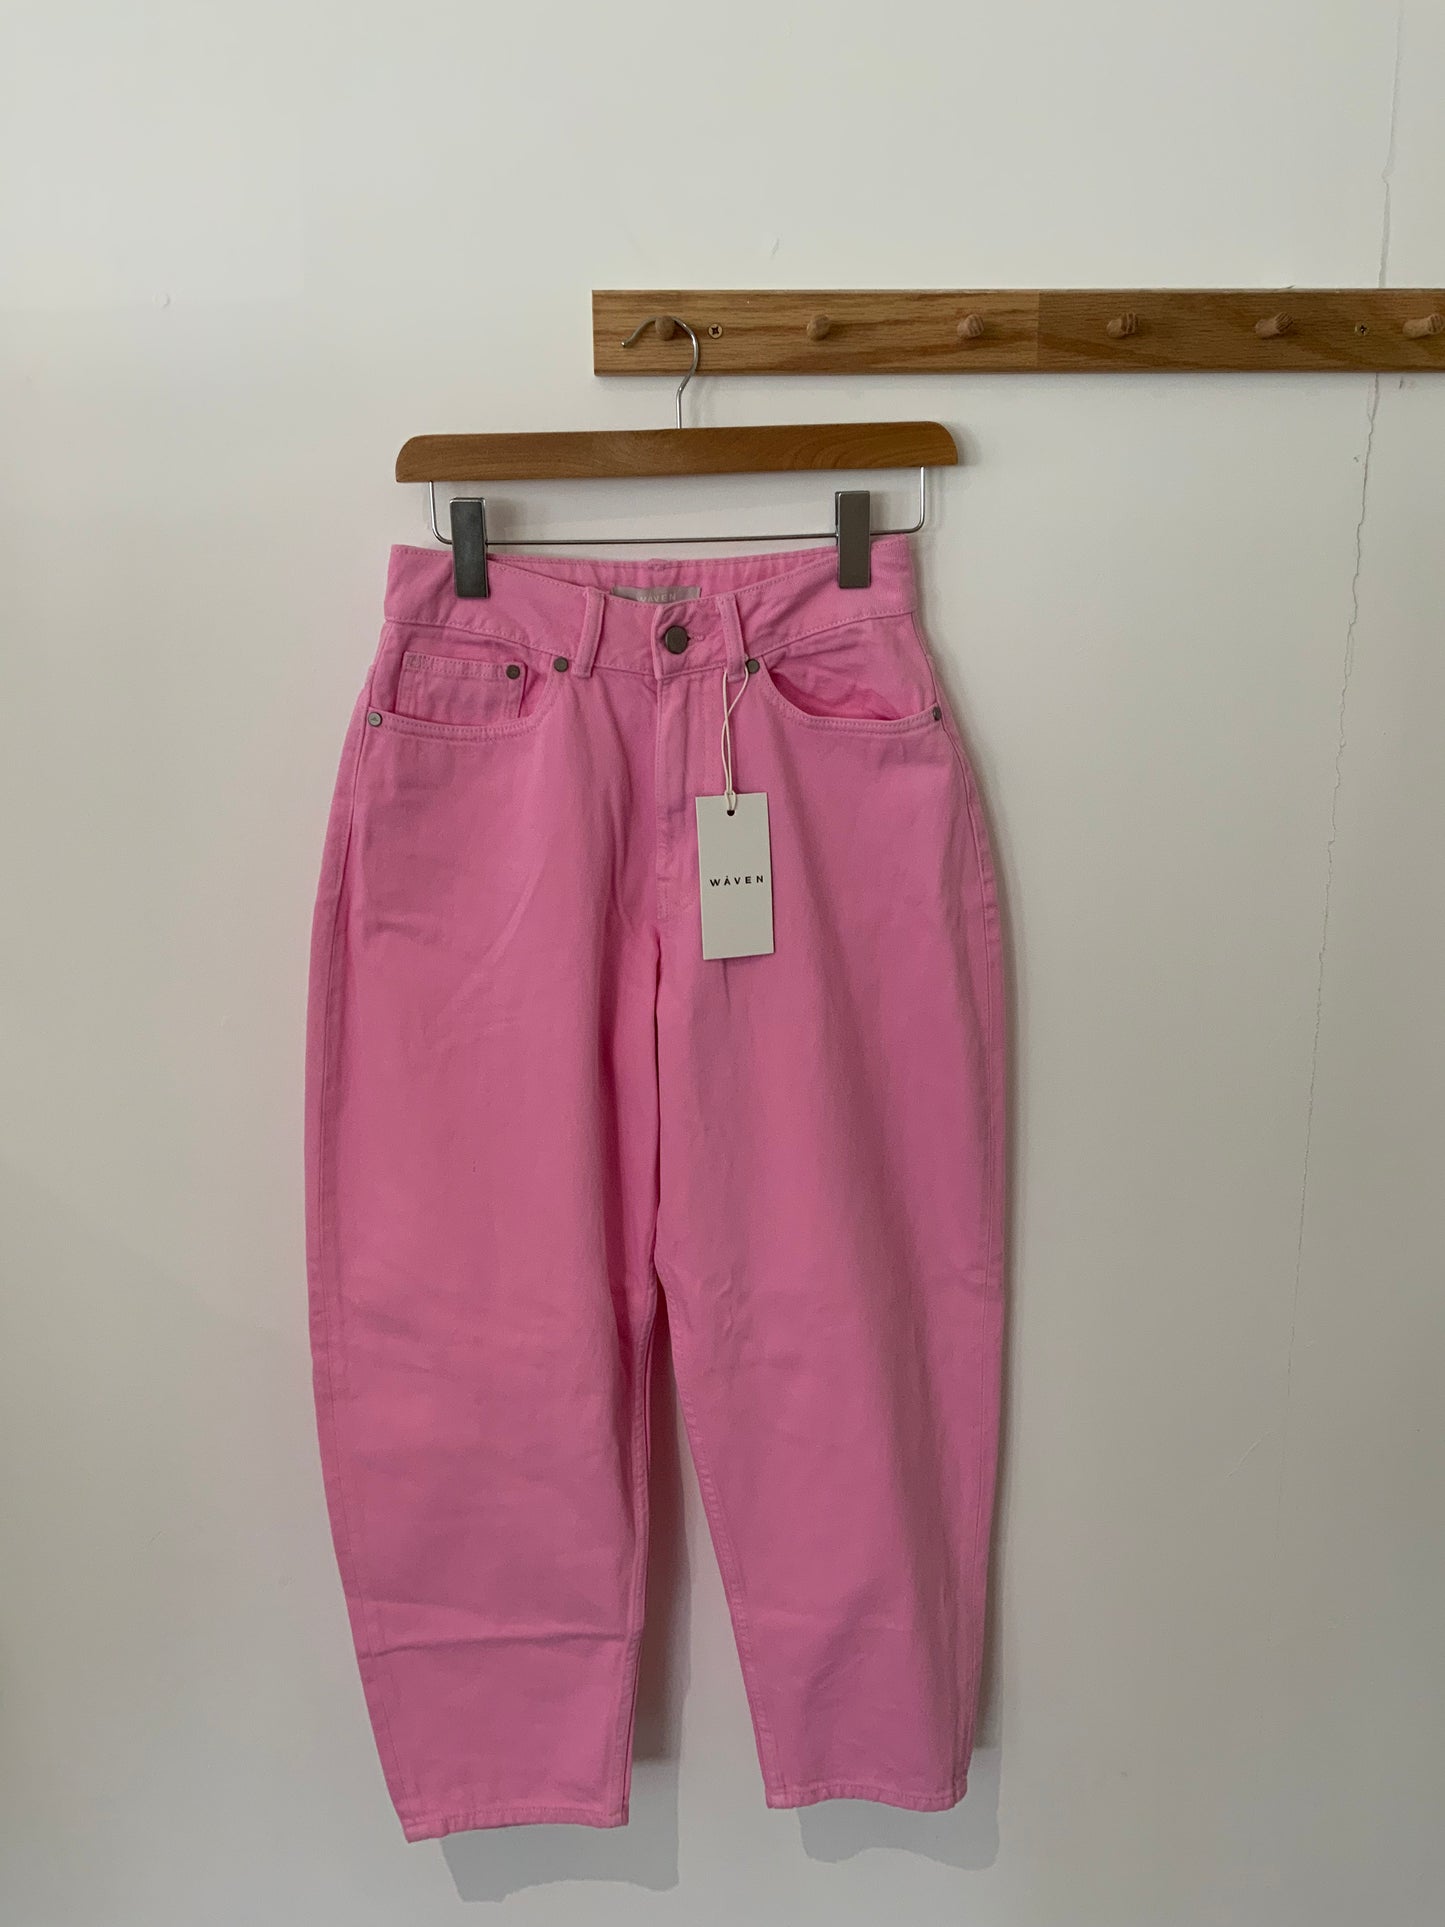 Waven Balloon Mom Fit Jeans in Pink